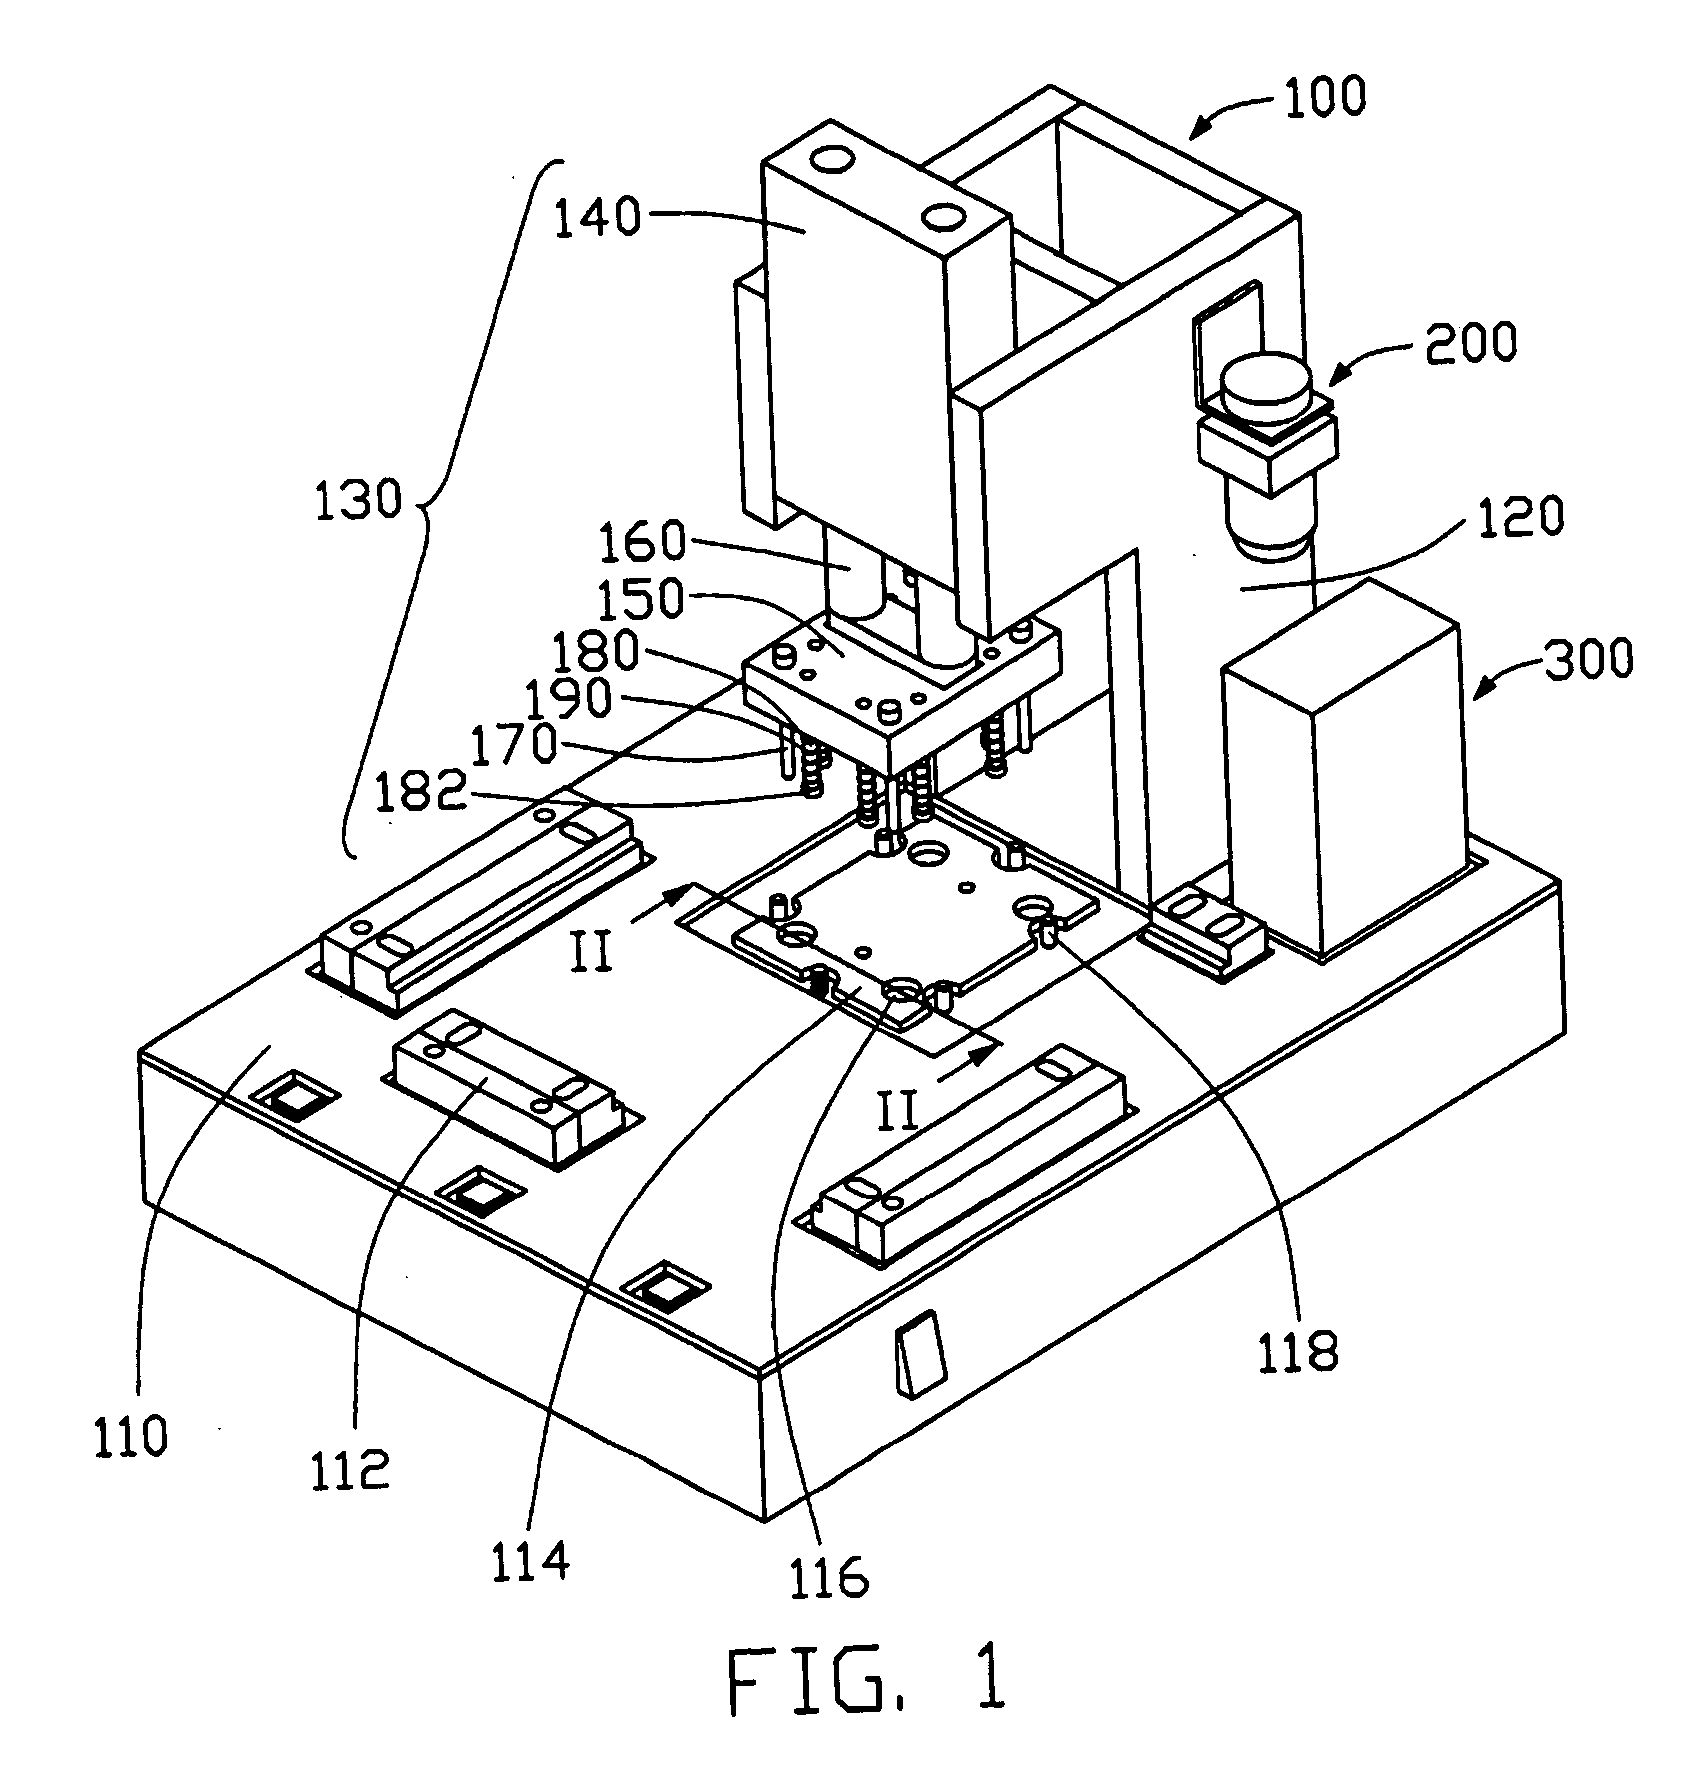 Stamping machine for mounting retention frame of heat sink to motherboard